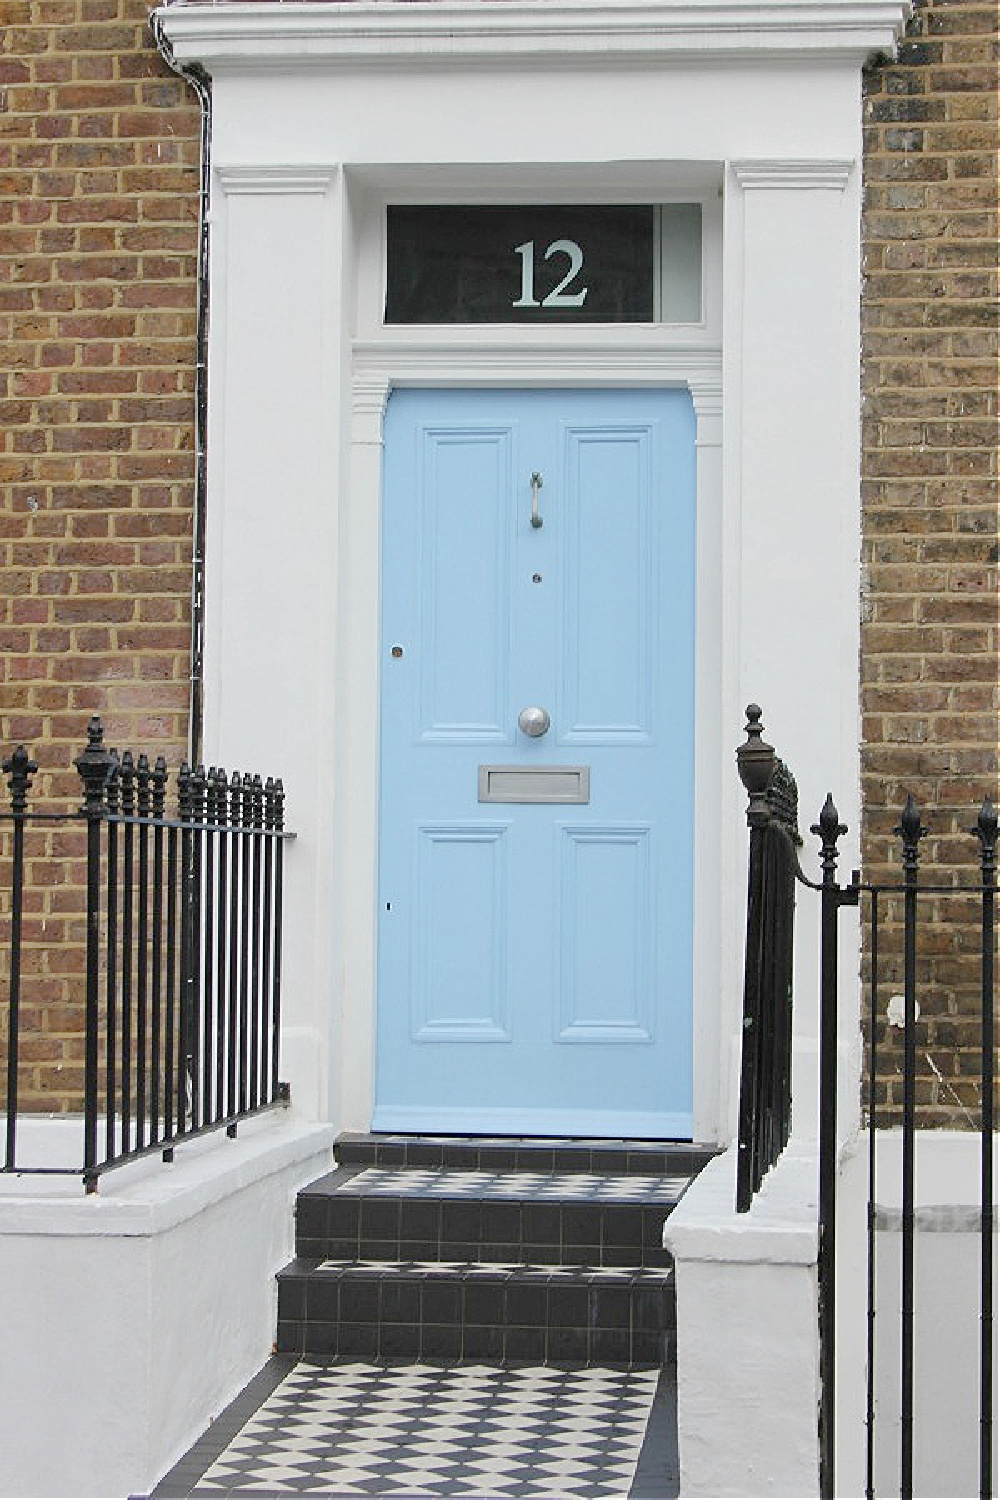 Beautiful sky blue bright front door and brick row house exterior in Notting Hill. Come explore paint colors for your front door. #frontdoorcolors #paintcolors #curbappeal